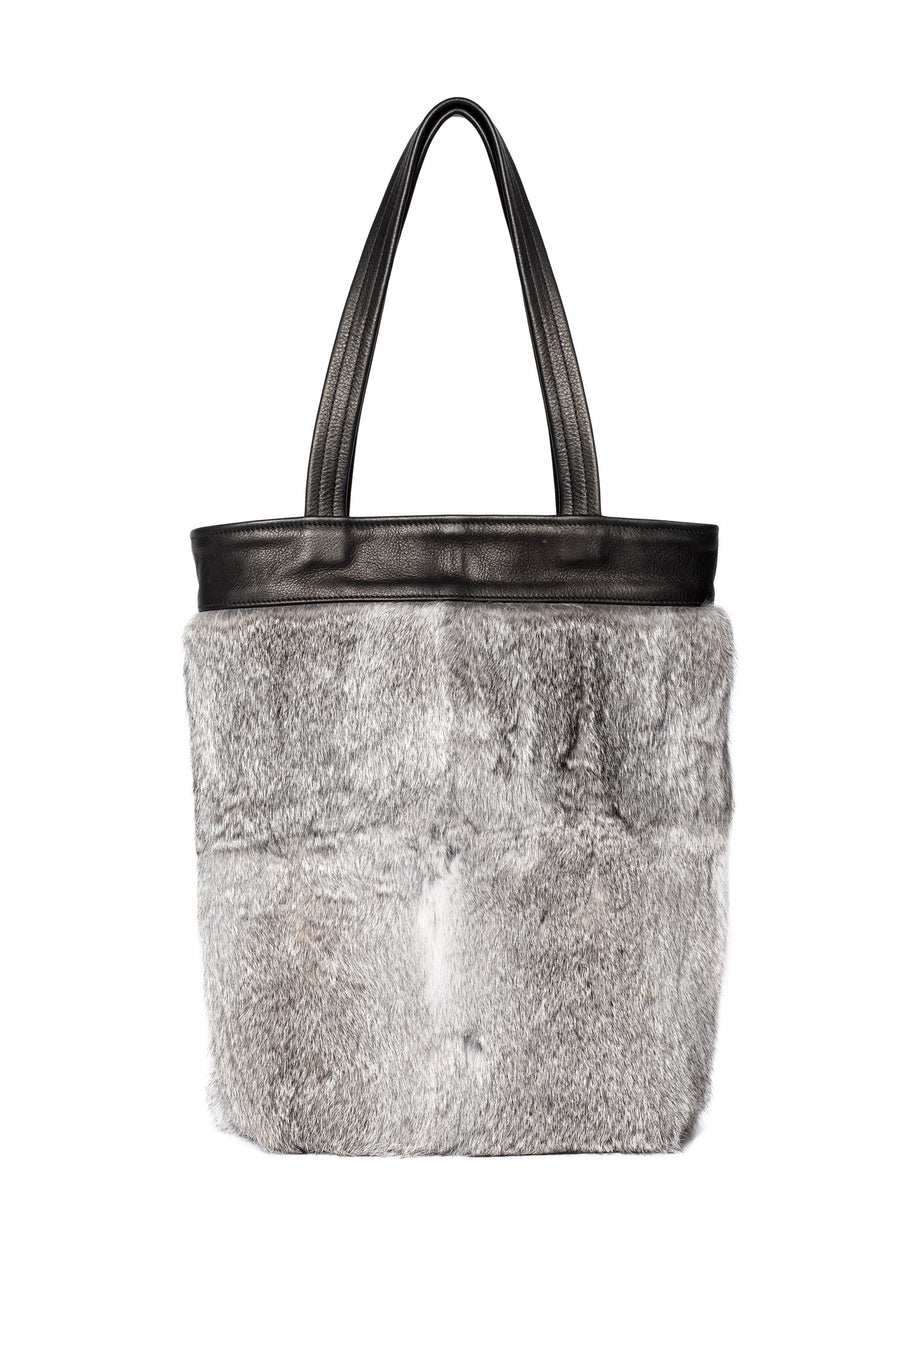 Gray Grey One of a Kind Rabbit Fur Tote Black Leather Wendy Nichol Luxury Handbag Purse Bag Designer handmade in NYC New York City one of a kind Durable Handle strap Interior Pocket High Quality Leather